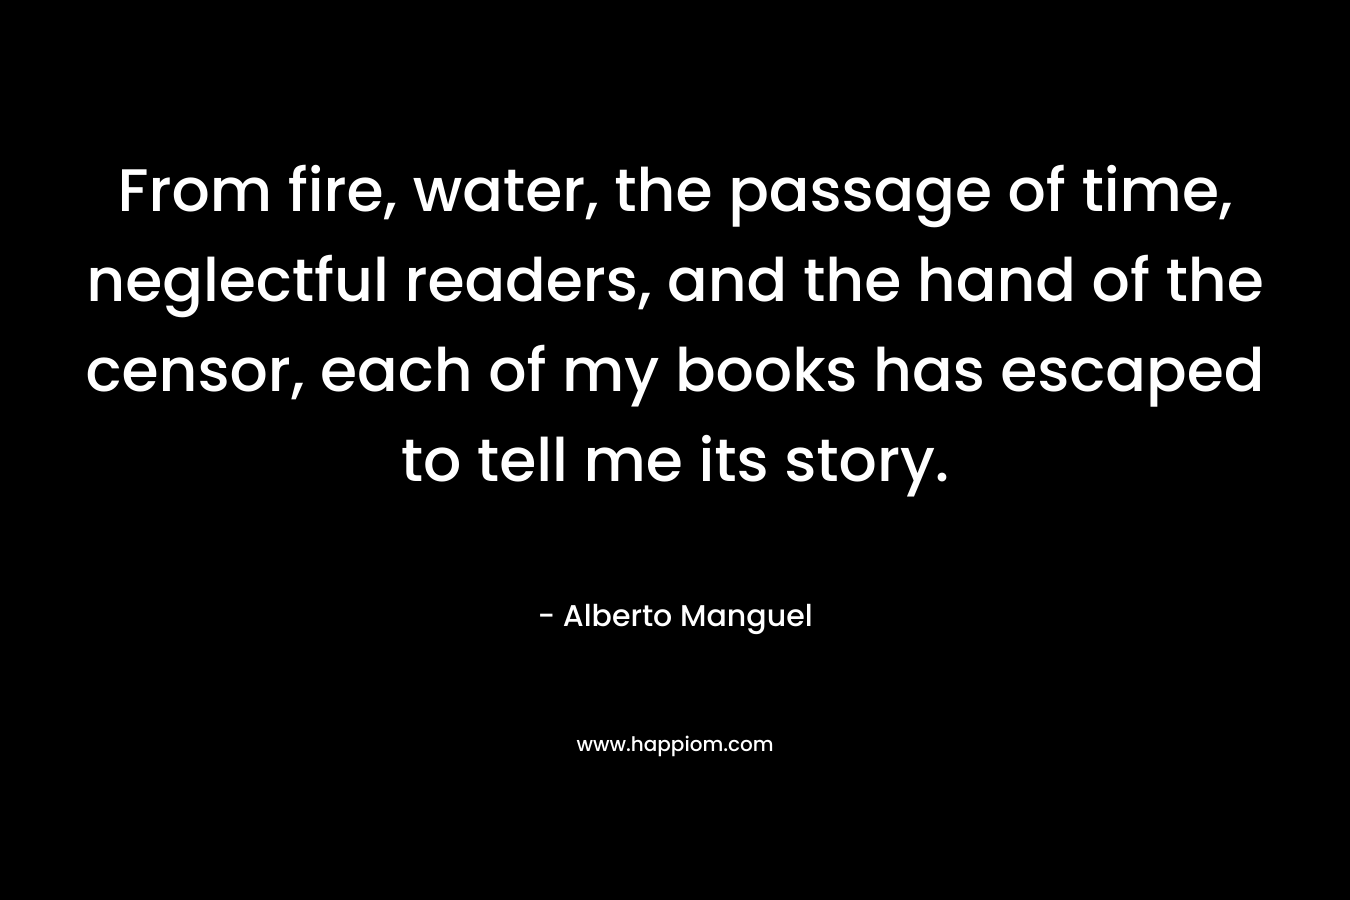 From fire, water, the passage of time, neglectful readers, and the hand of the censor, each of my books has escaped to tell me its story. – Alberto Manguel